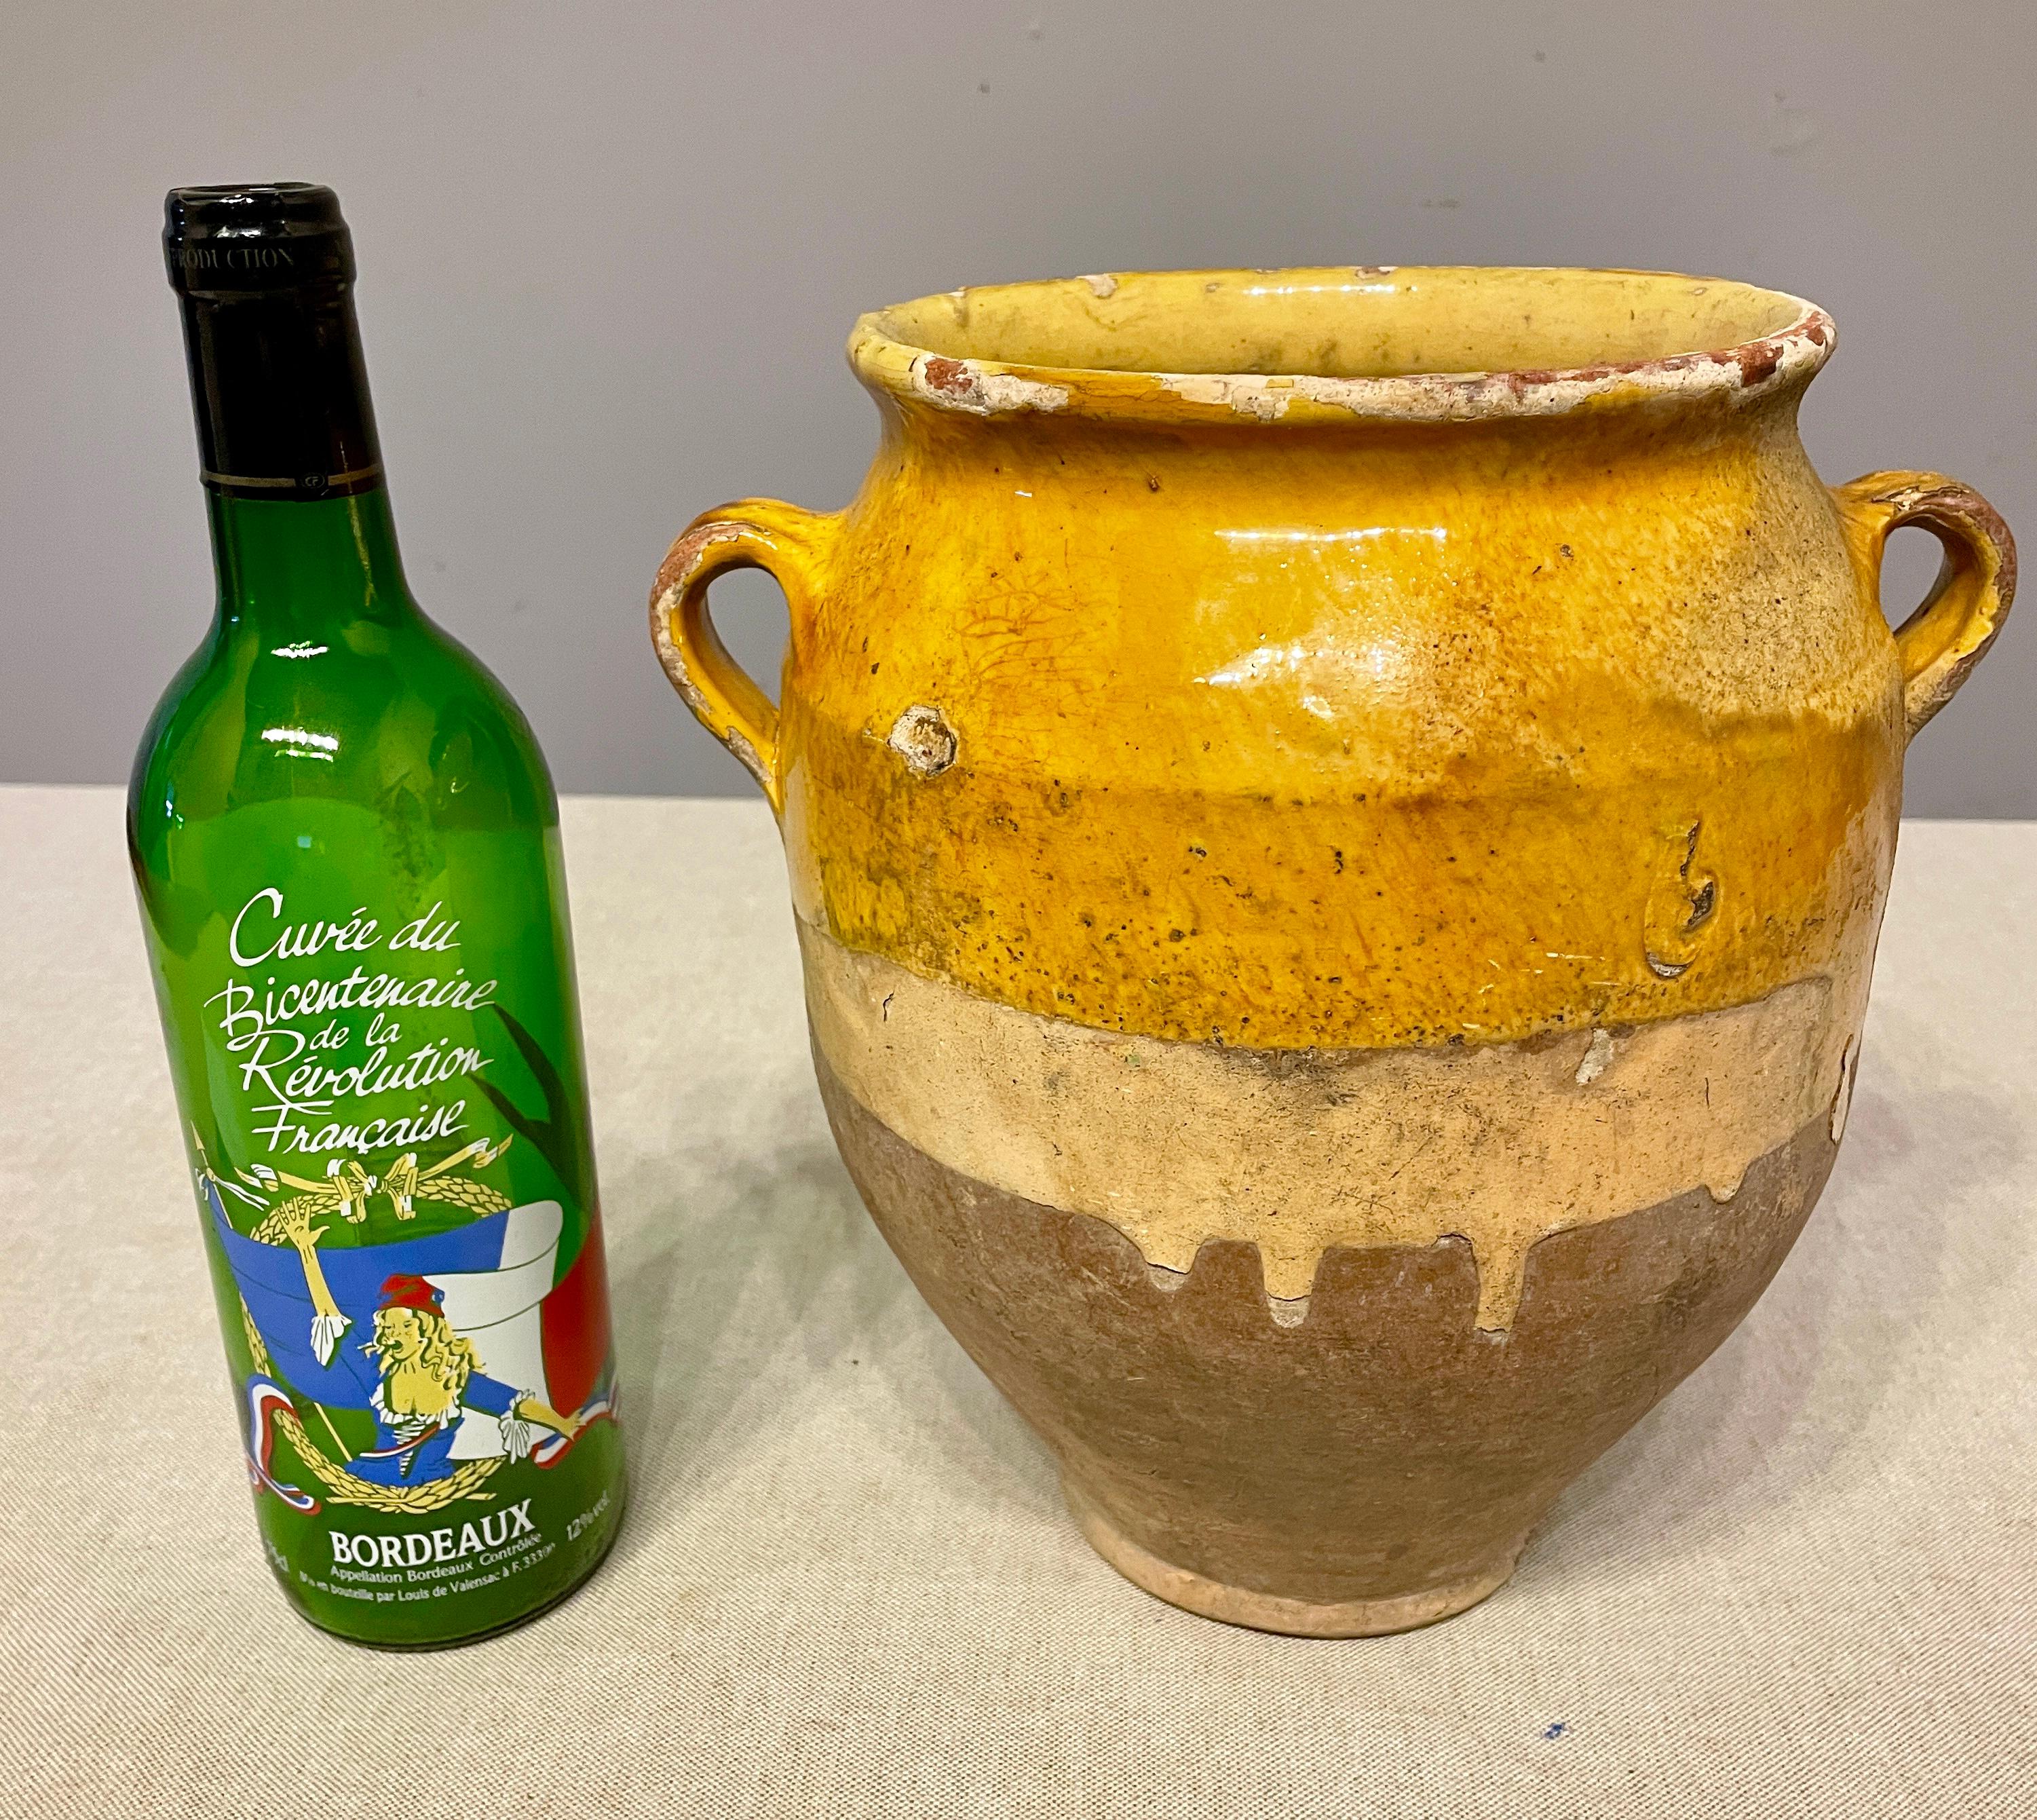 An earthenware confit pot from the Southwest of France with traditional yellow, ochre glaze. Some chips and losses to glaze. These ordinary earthenware vessels were once used daily in the French country home and have beautiful rustic glazes of